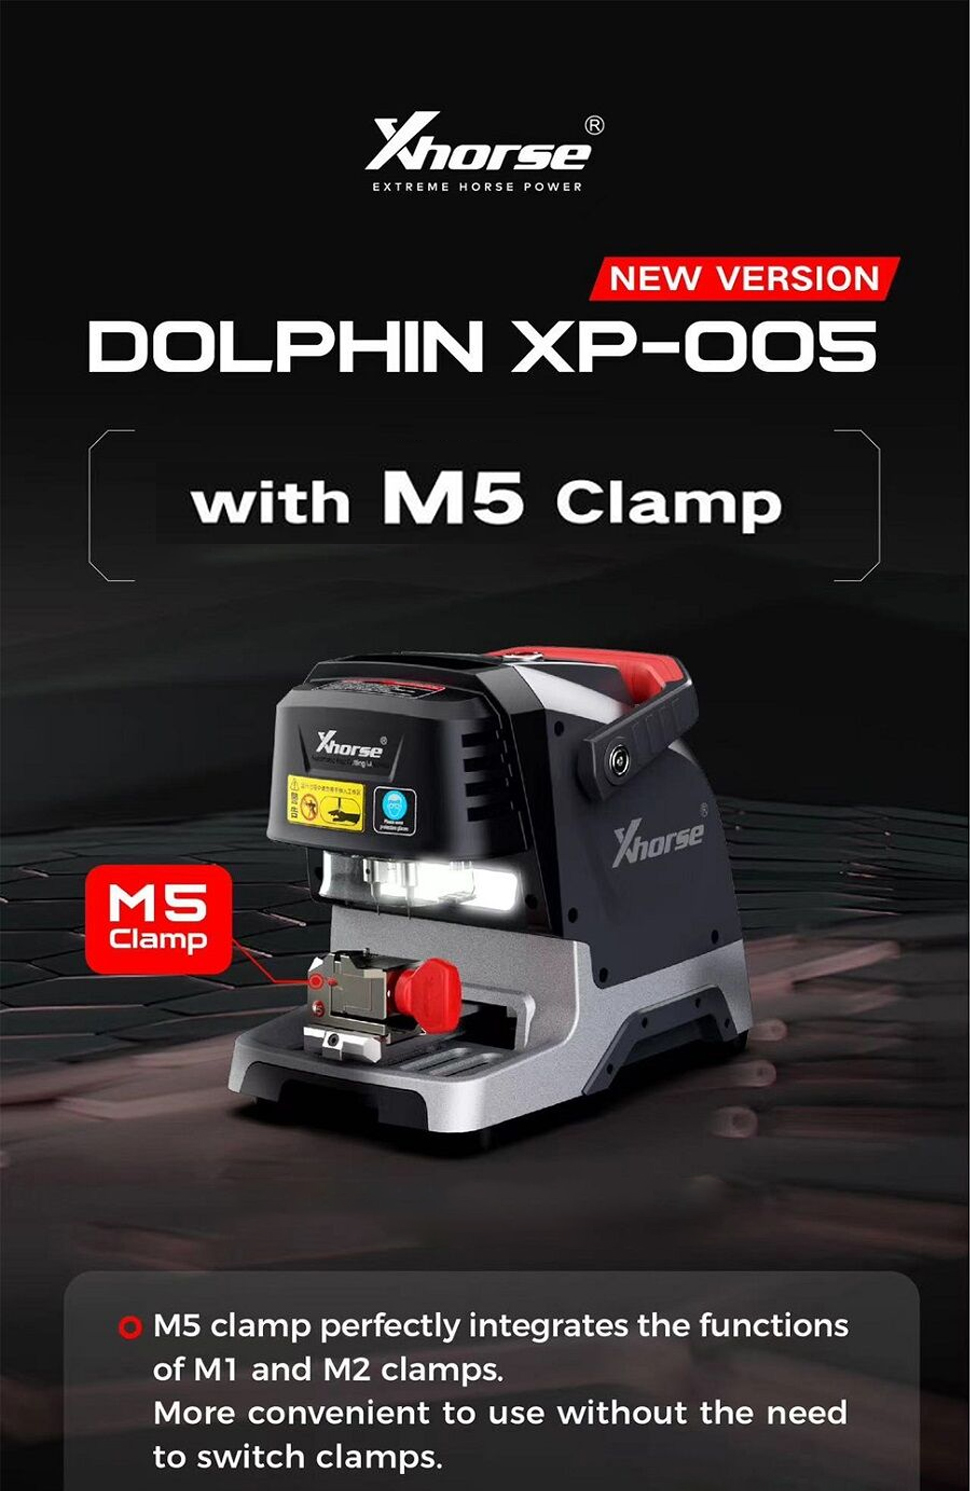 Xhorse Dolphin XP-005 Key Cutting Machine with M5 Clamp